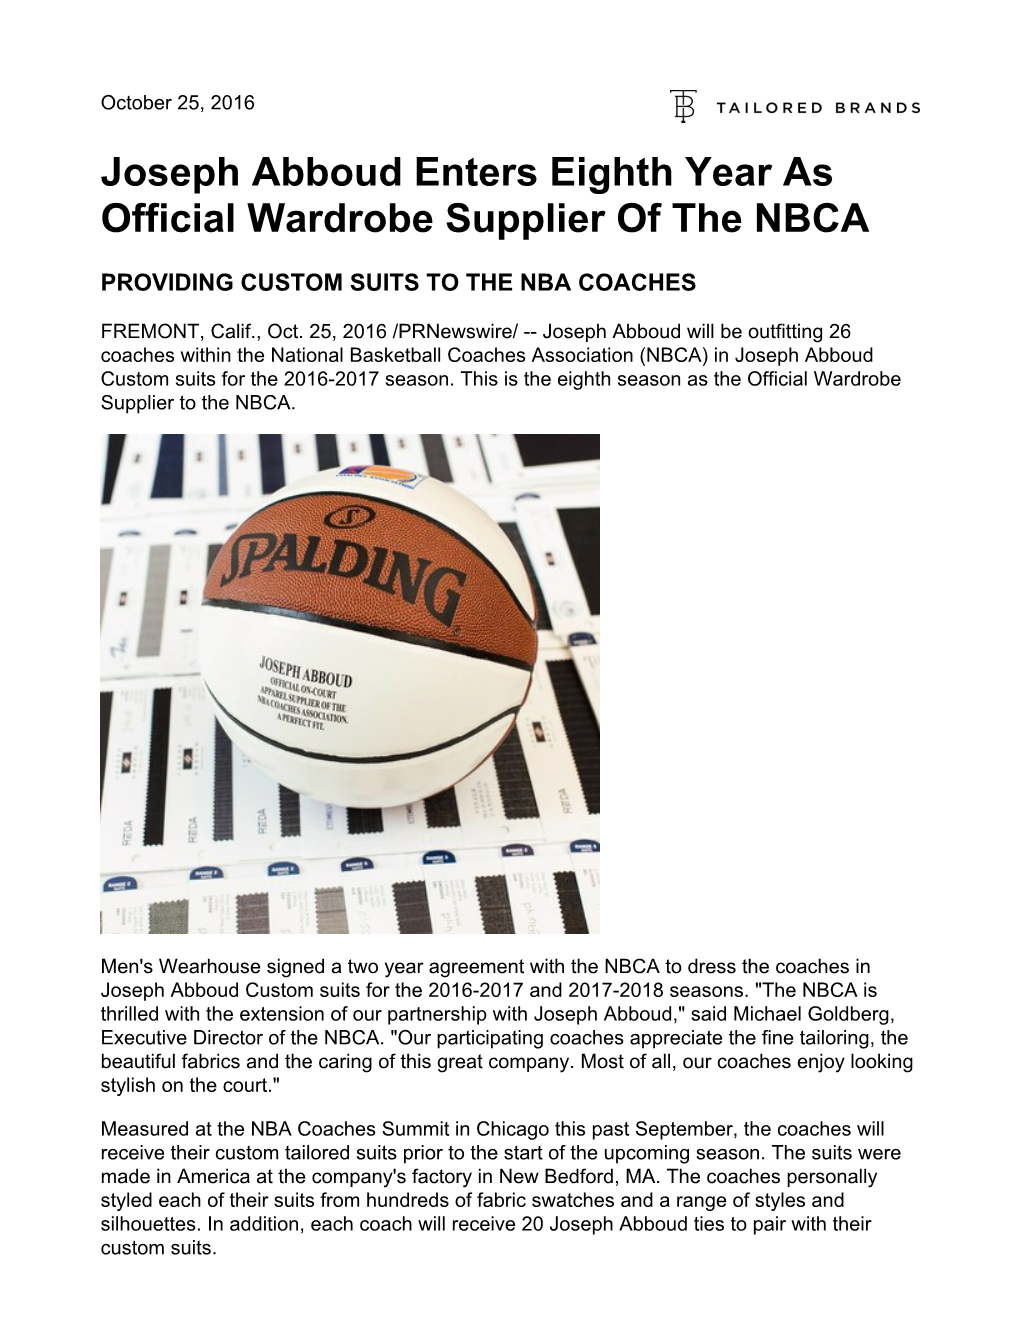 Joseph Abboud Enters Eighth Year As Official Wardrobe Supplier of the NBCA